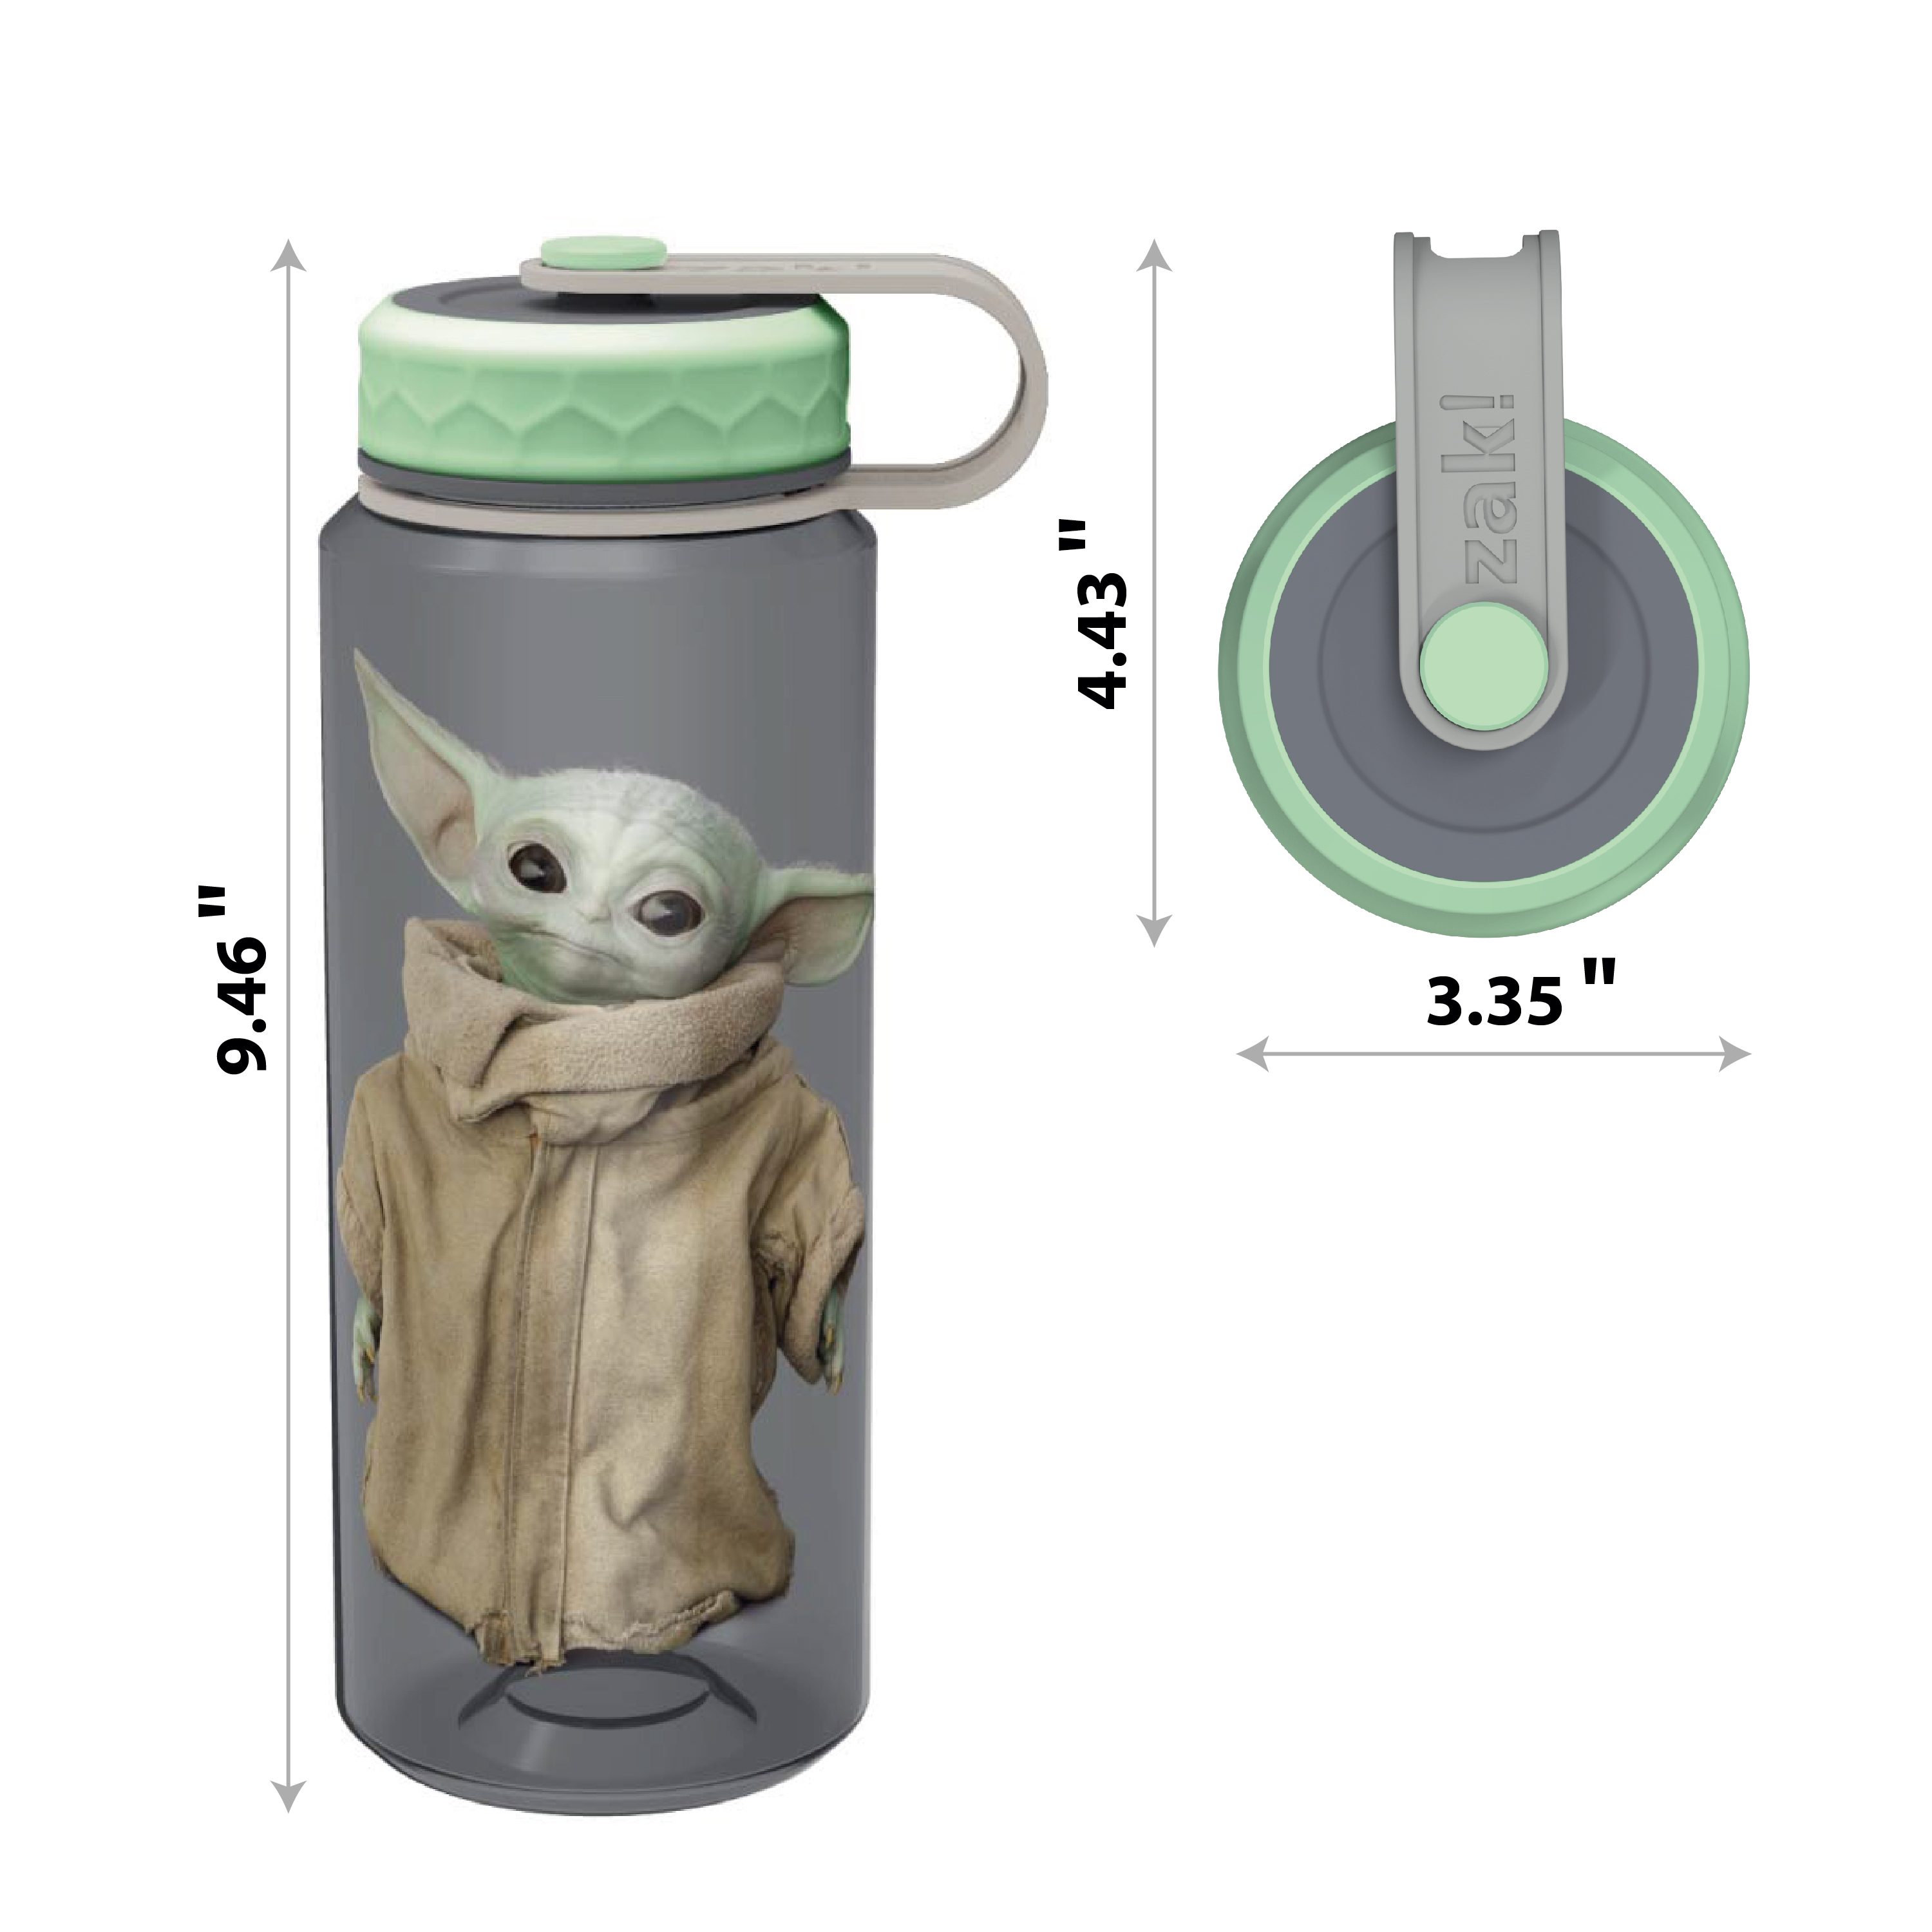 Star Wars: The Mandalorian 36 ounce Reusable Plastic Water Bottle, The Child (Baby Yoda) slideshow image 6